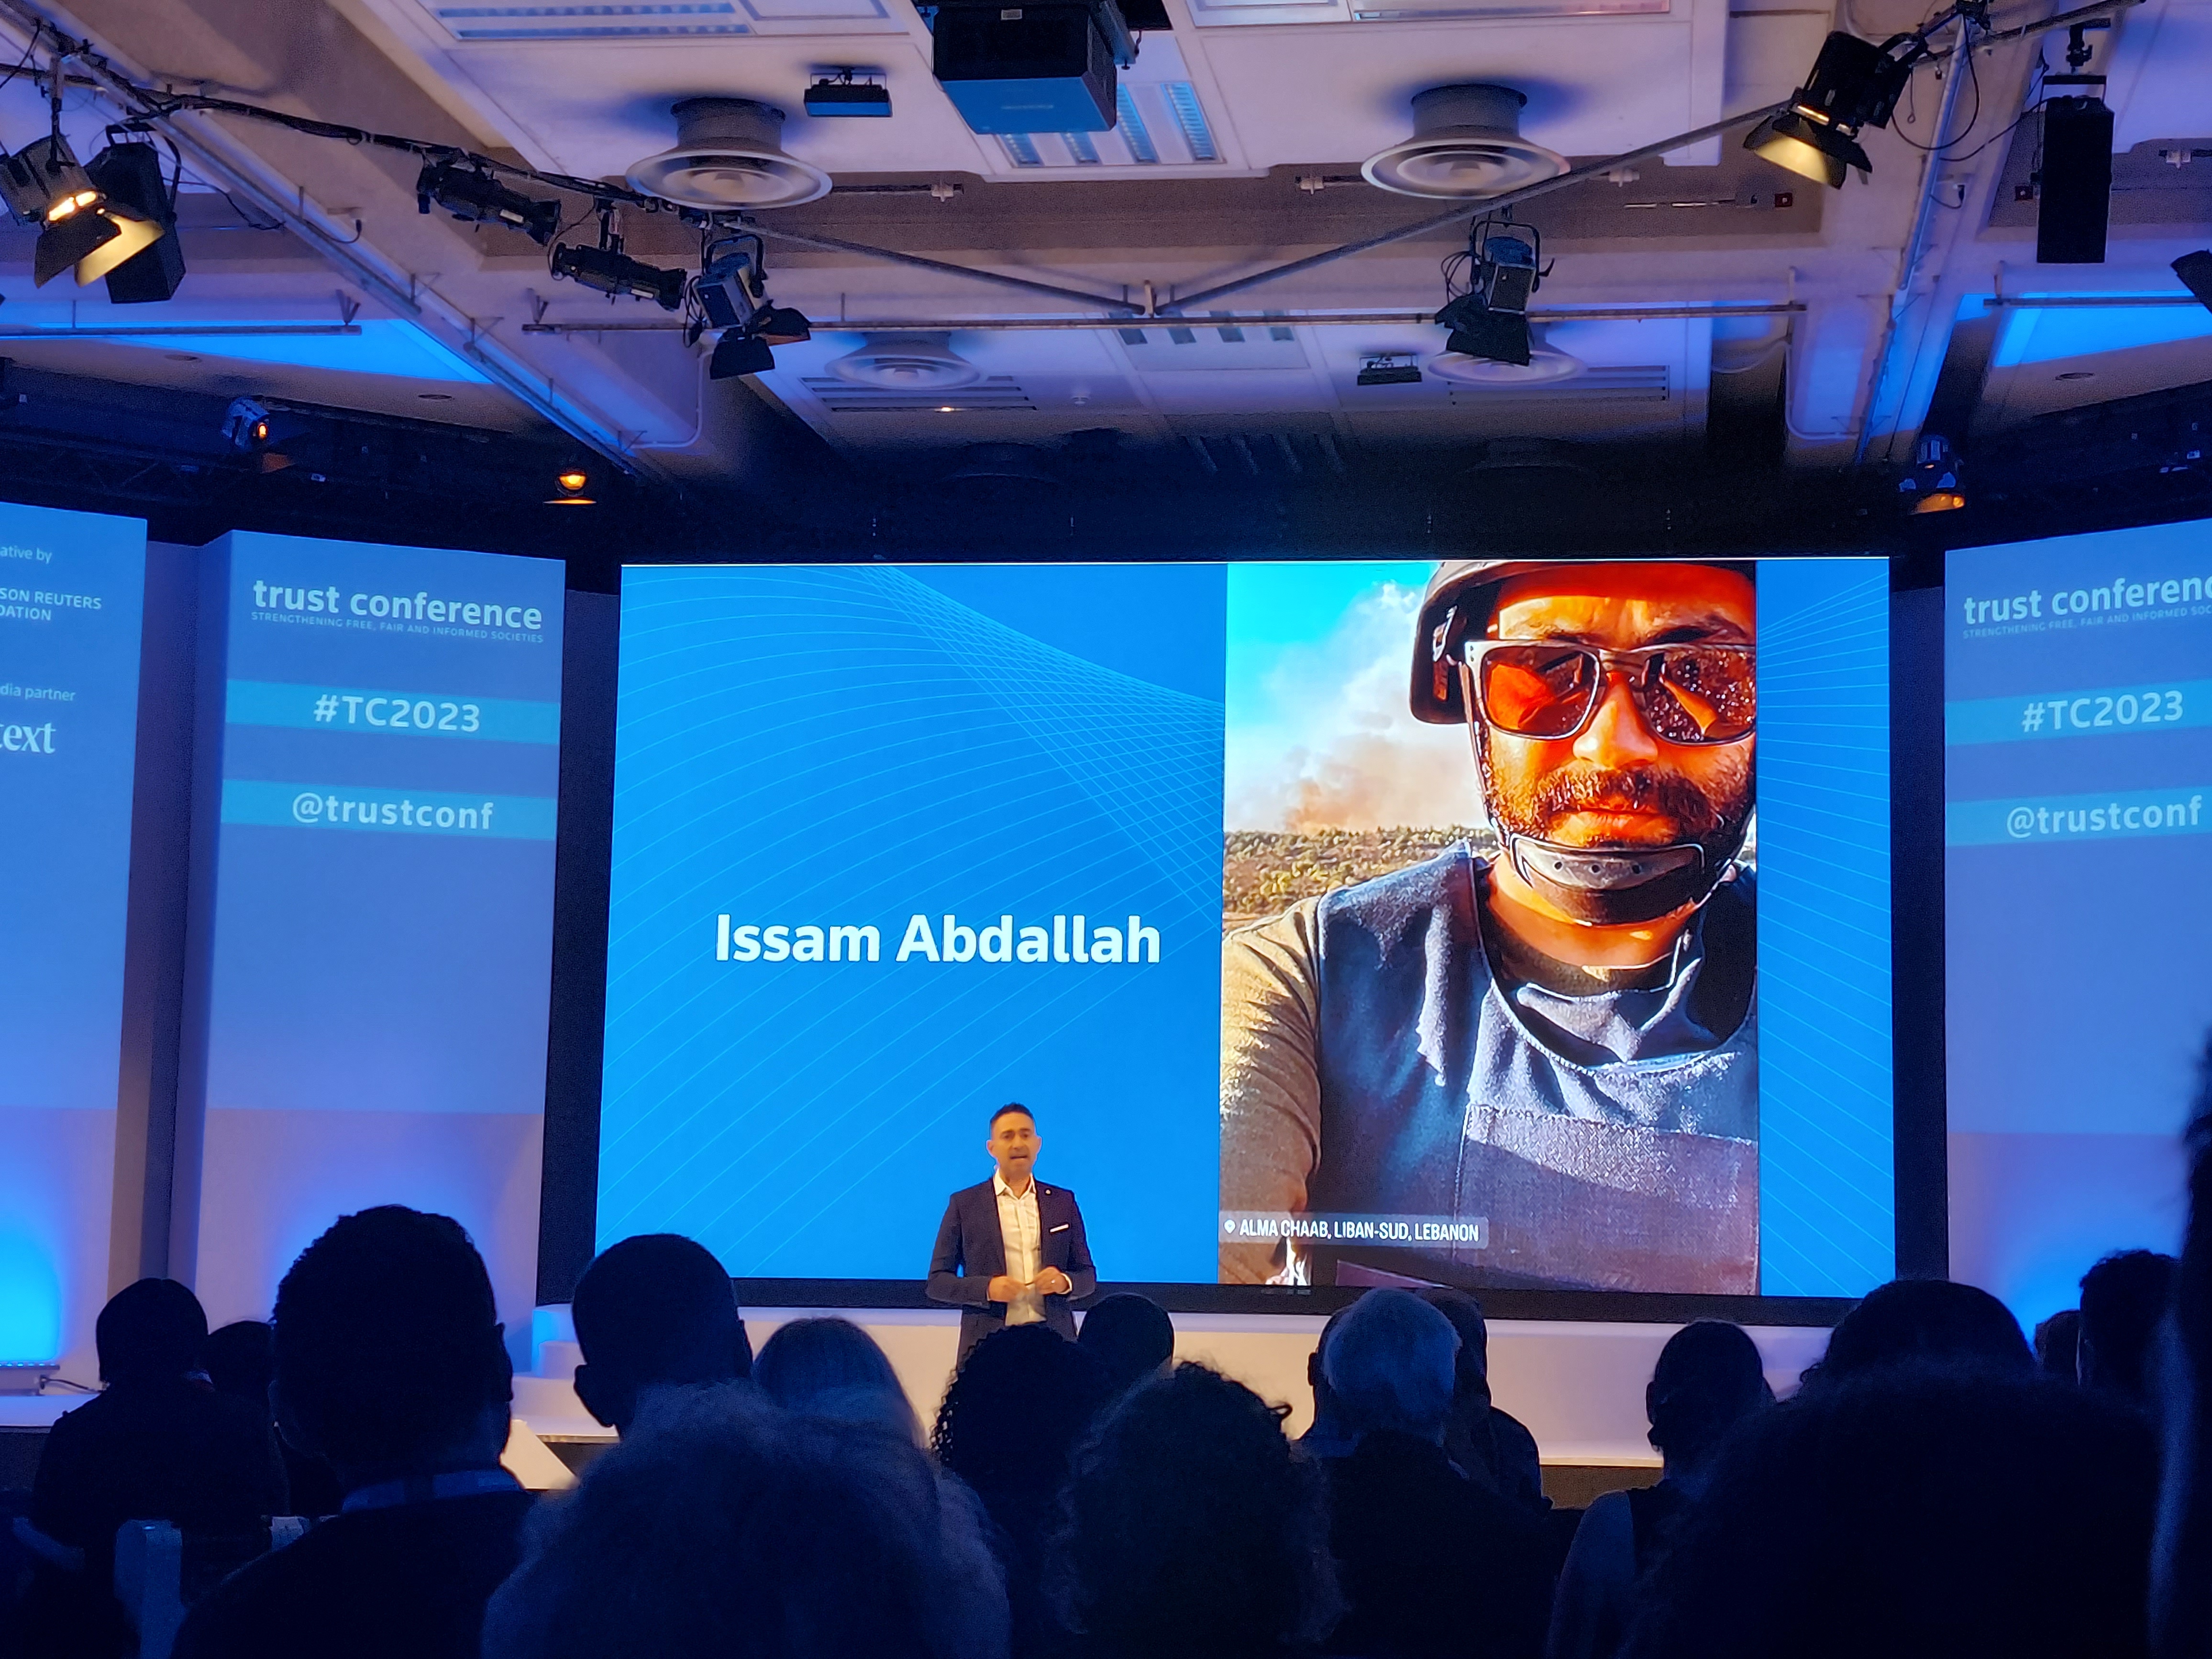 TRF CEO Antonio Zappulla stands in front of a screen showing the face of Issam Abdallah.